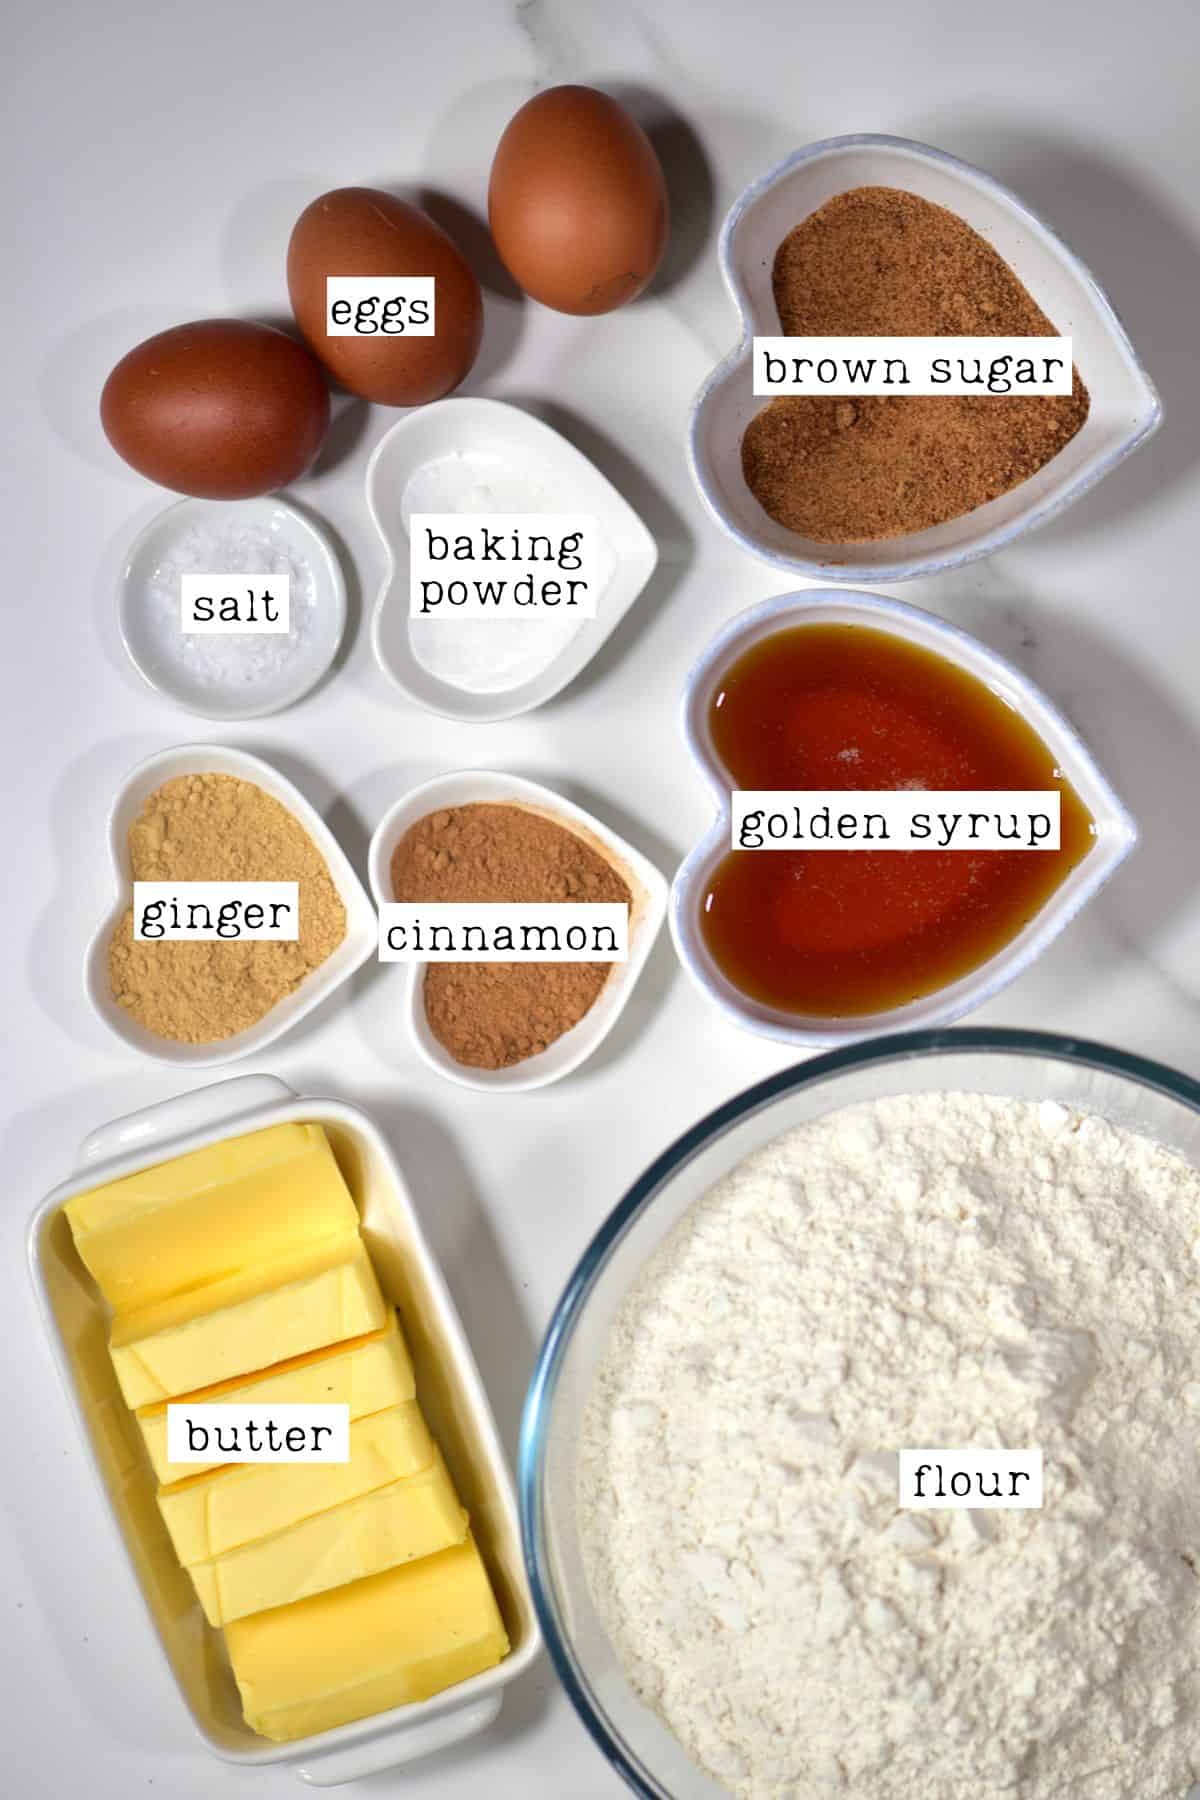 Ingredients for gingerbread house